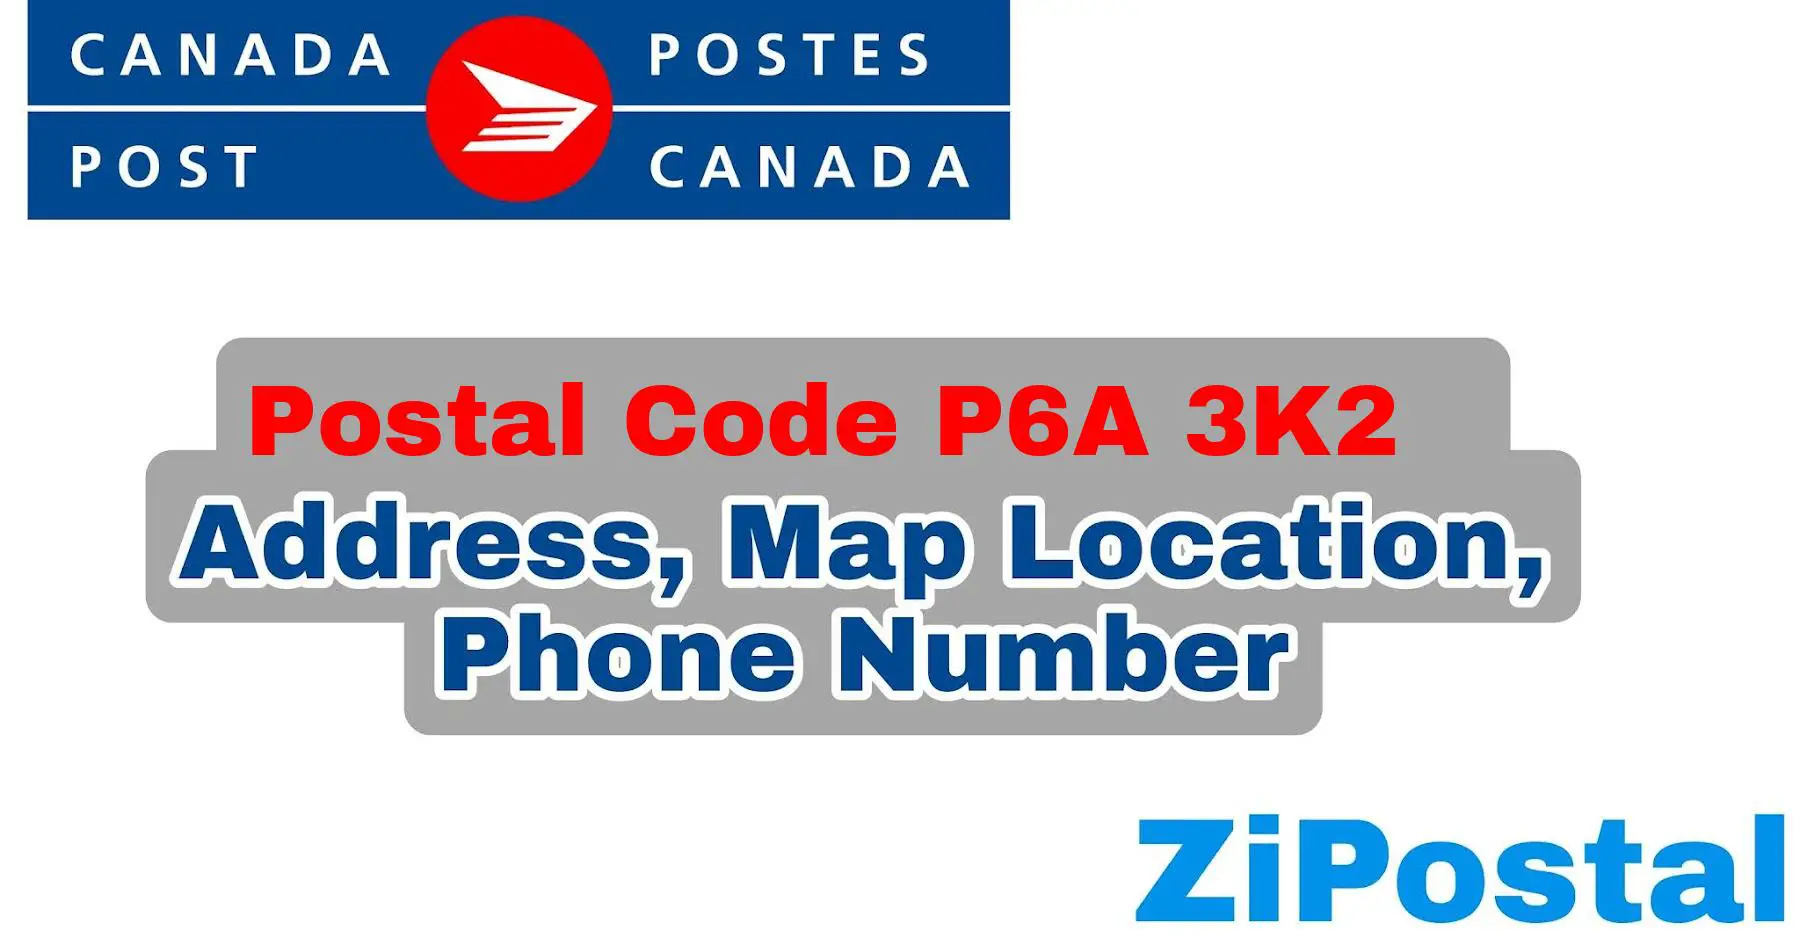 Postal Code P6A 3K2 Address Map Location and Phone Number